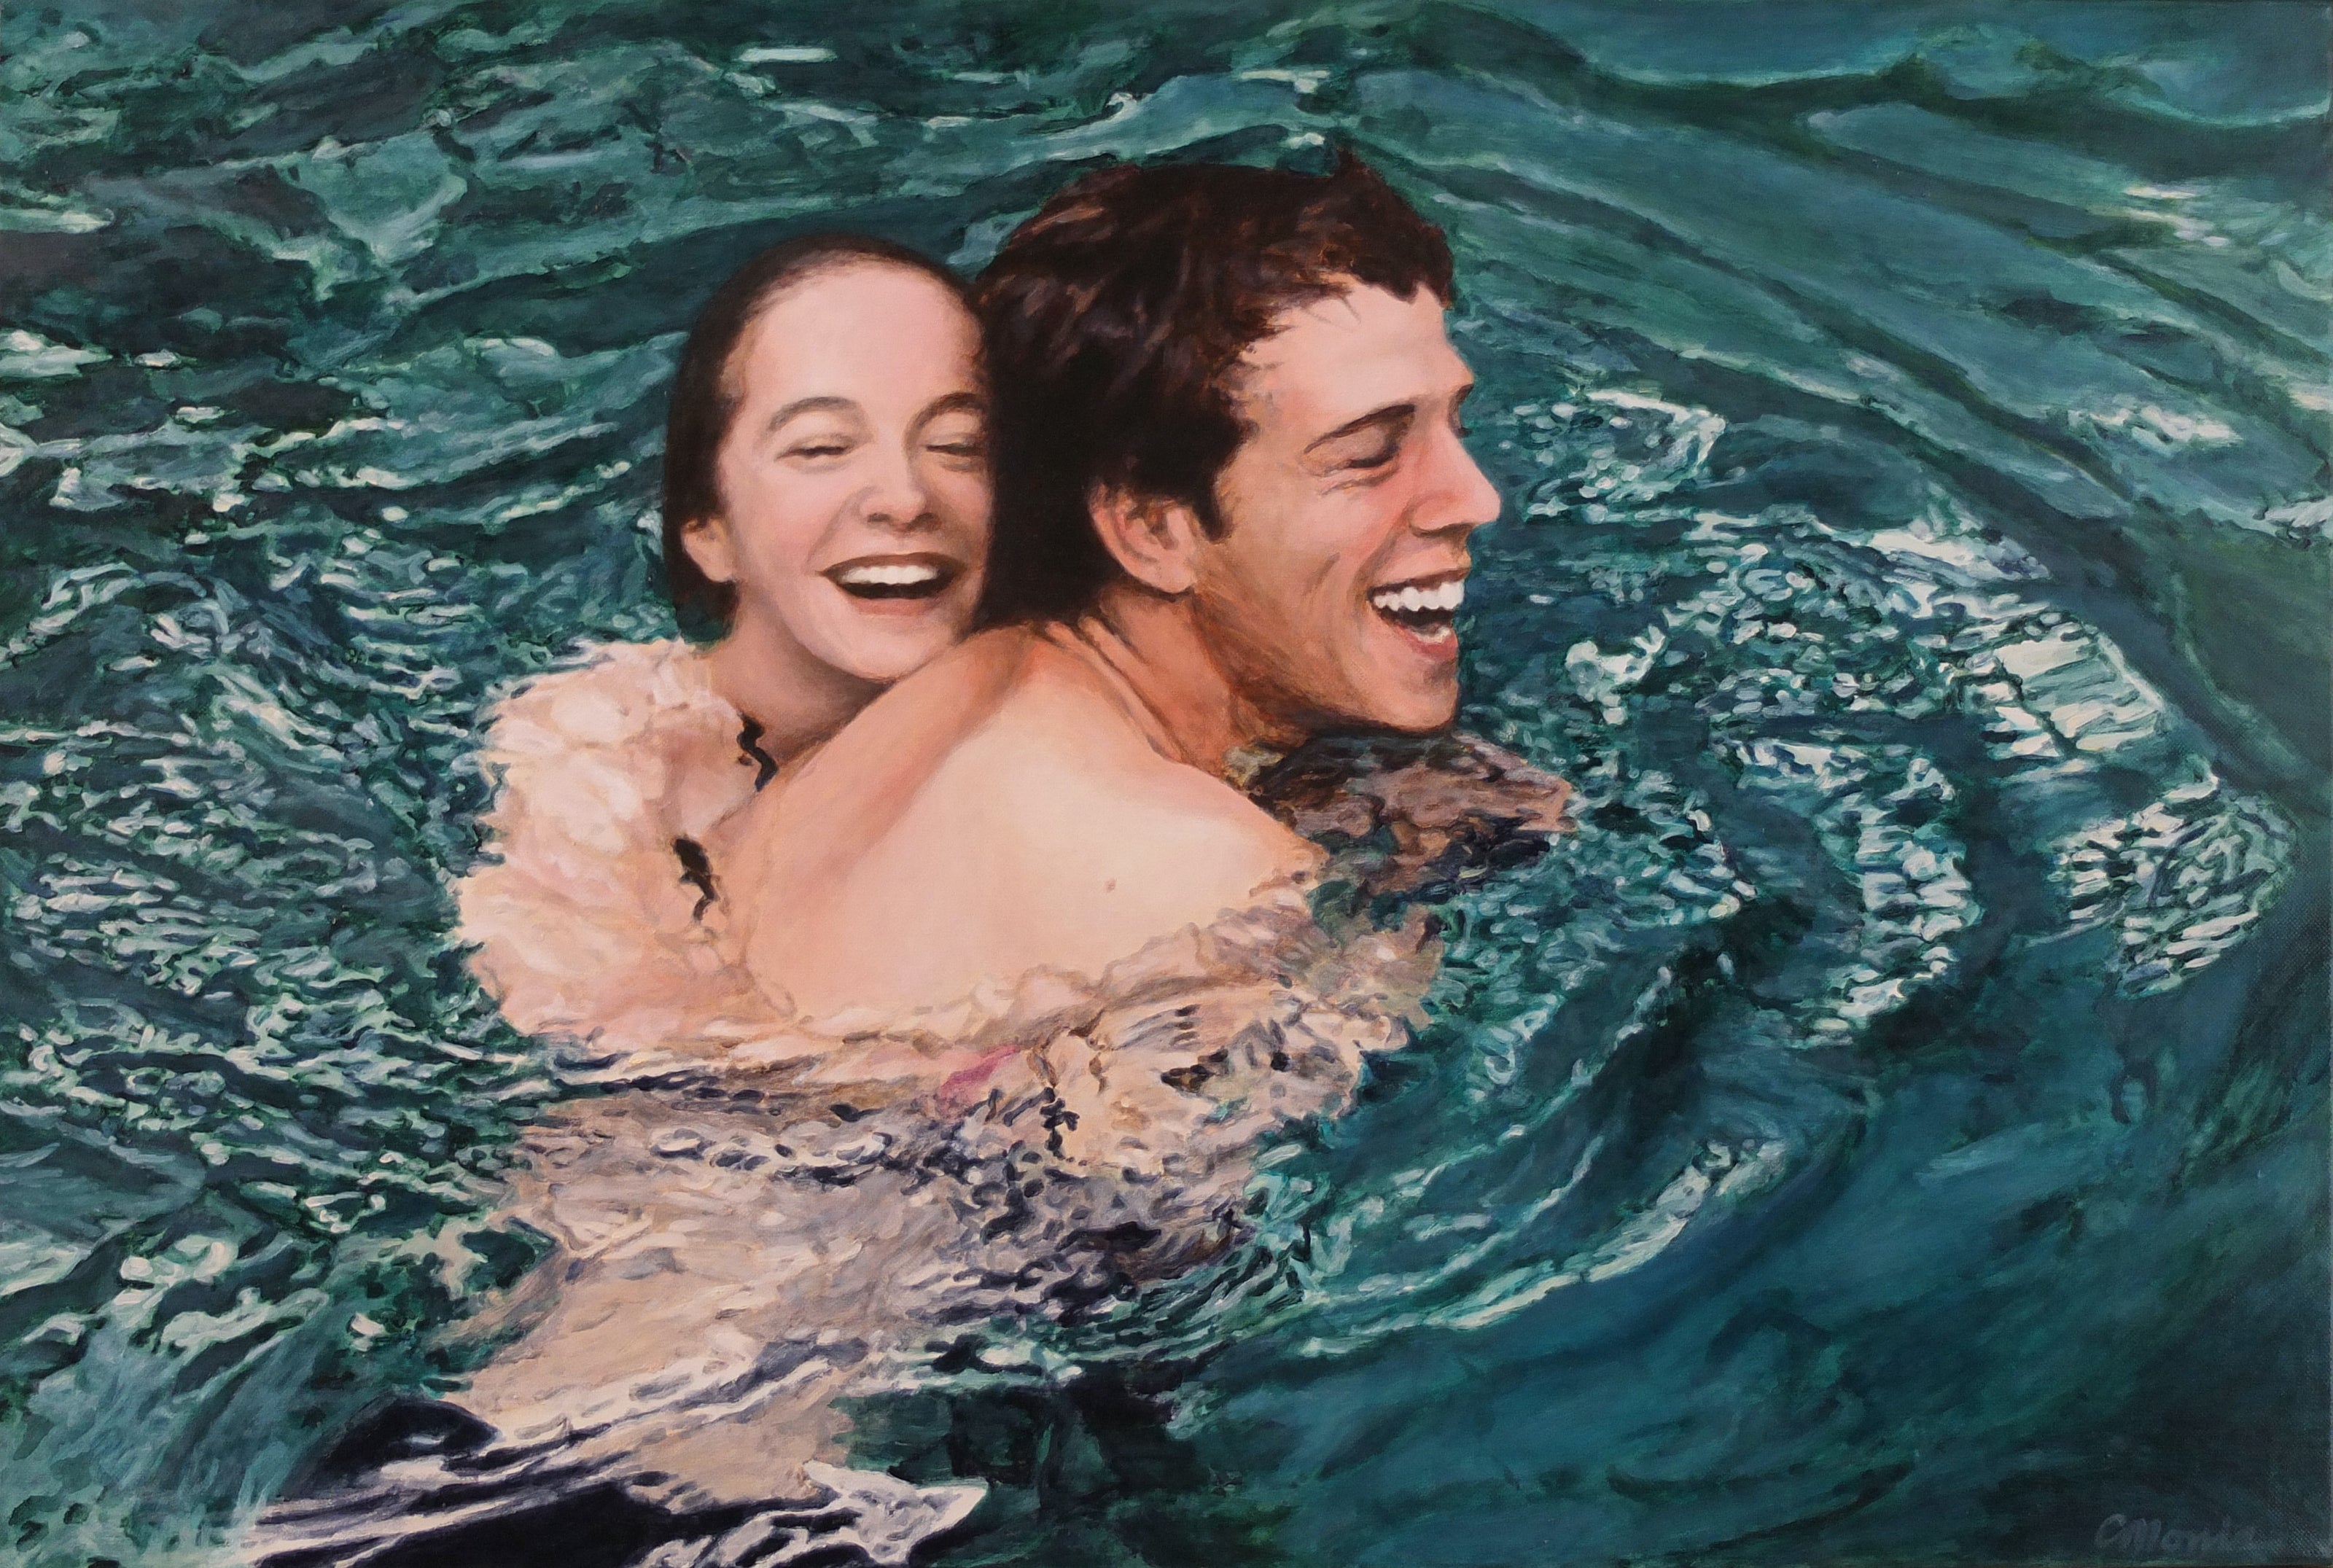 Lachlan & Angie, Oil on Italian linen by Camellia Morris